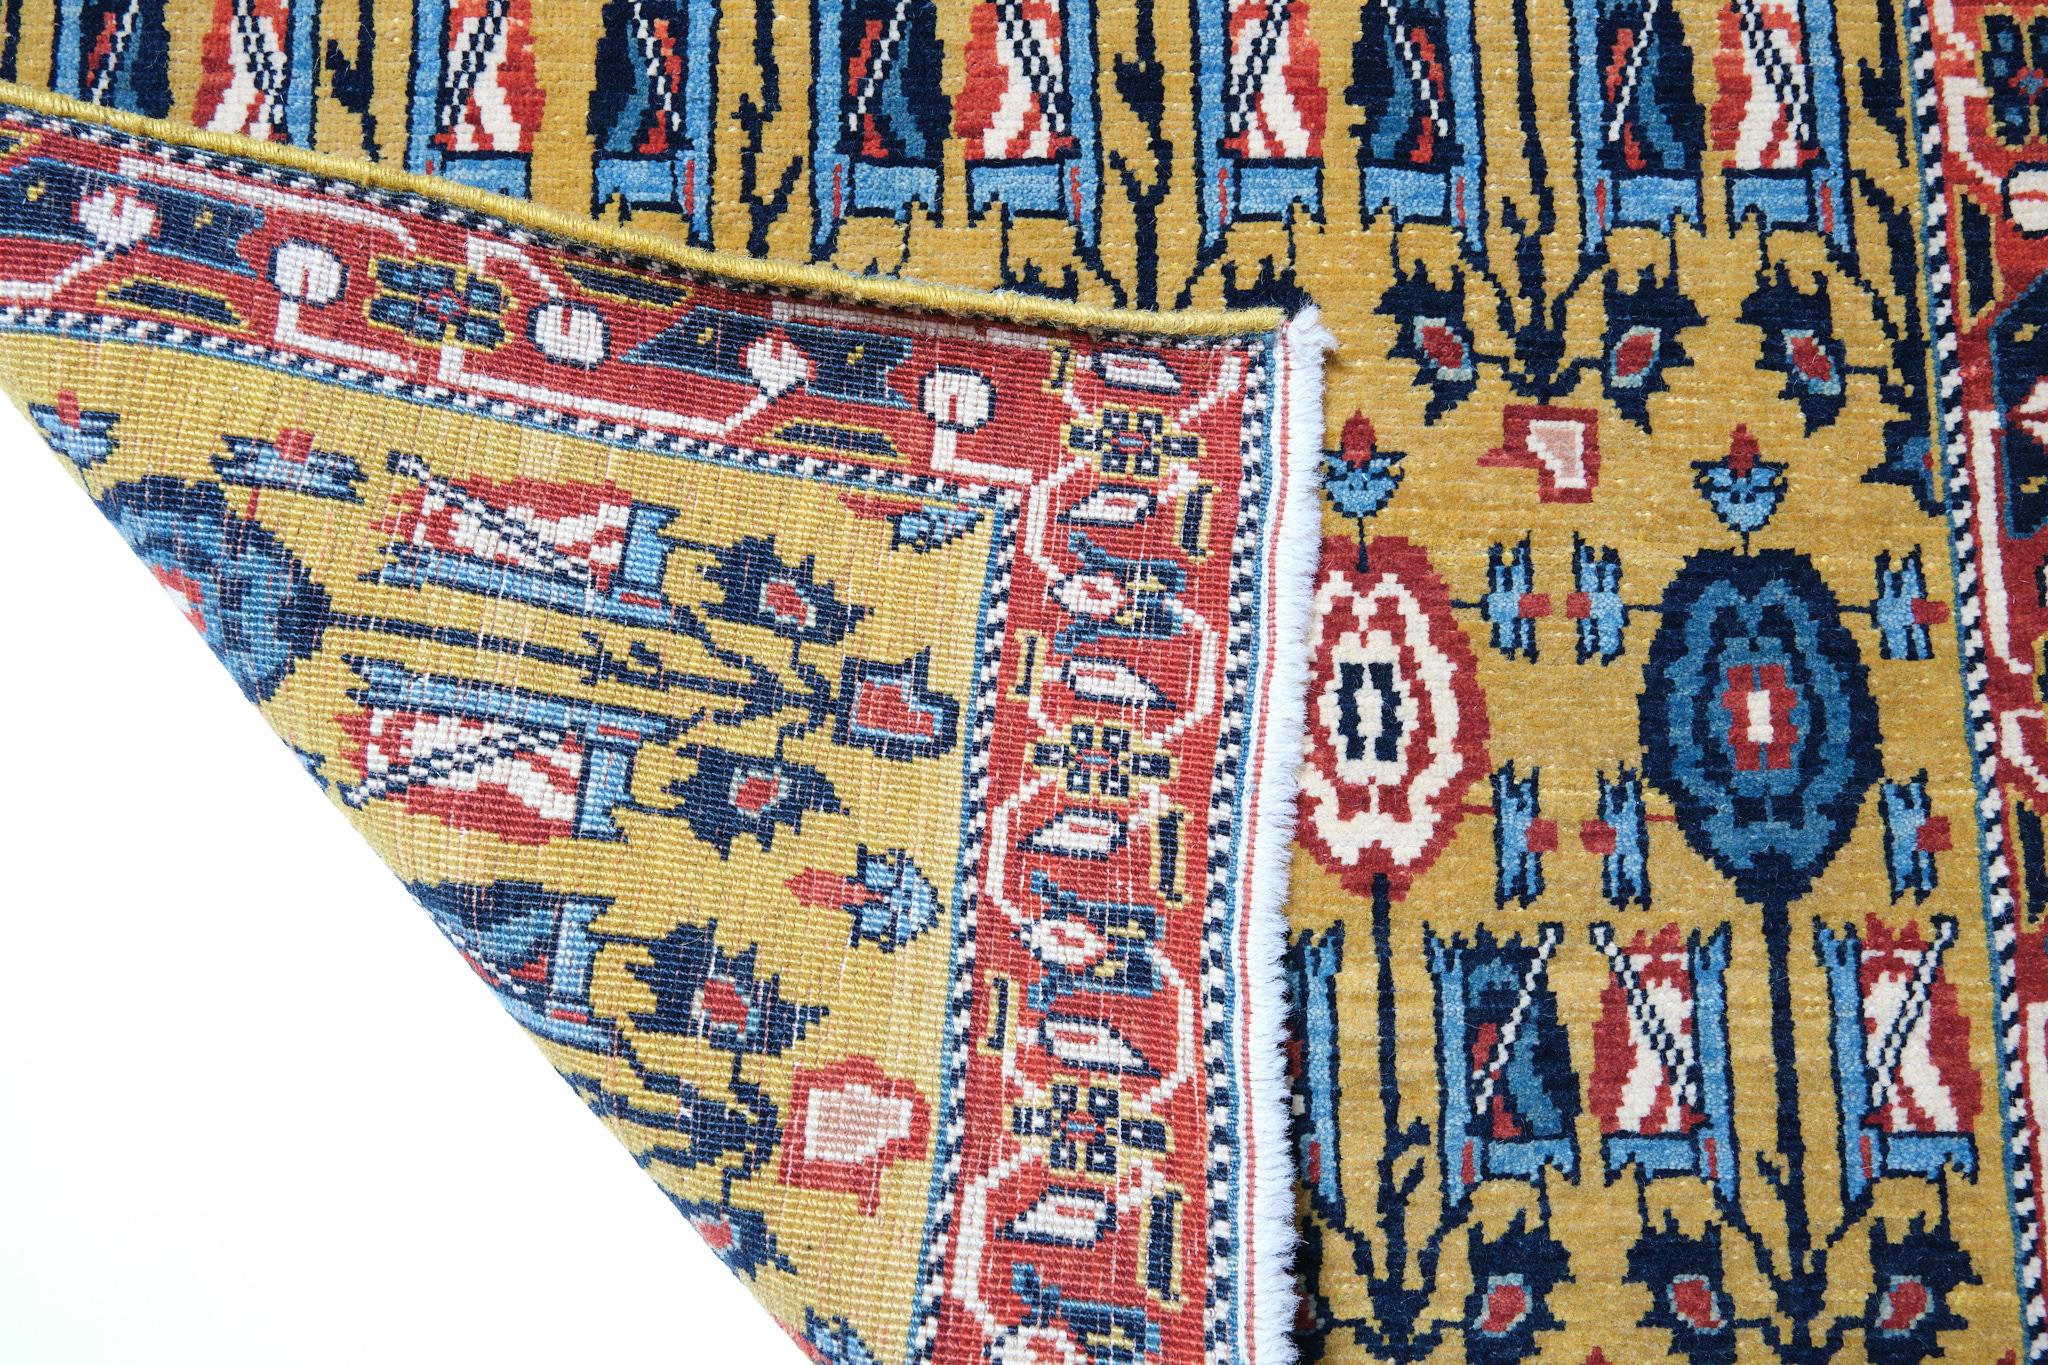 Turkish Ararat Rugs Senna Rows of Flowers Rug, 18th Century Revival Carpet Natural Dyed For Sale